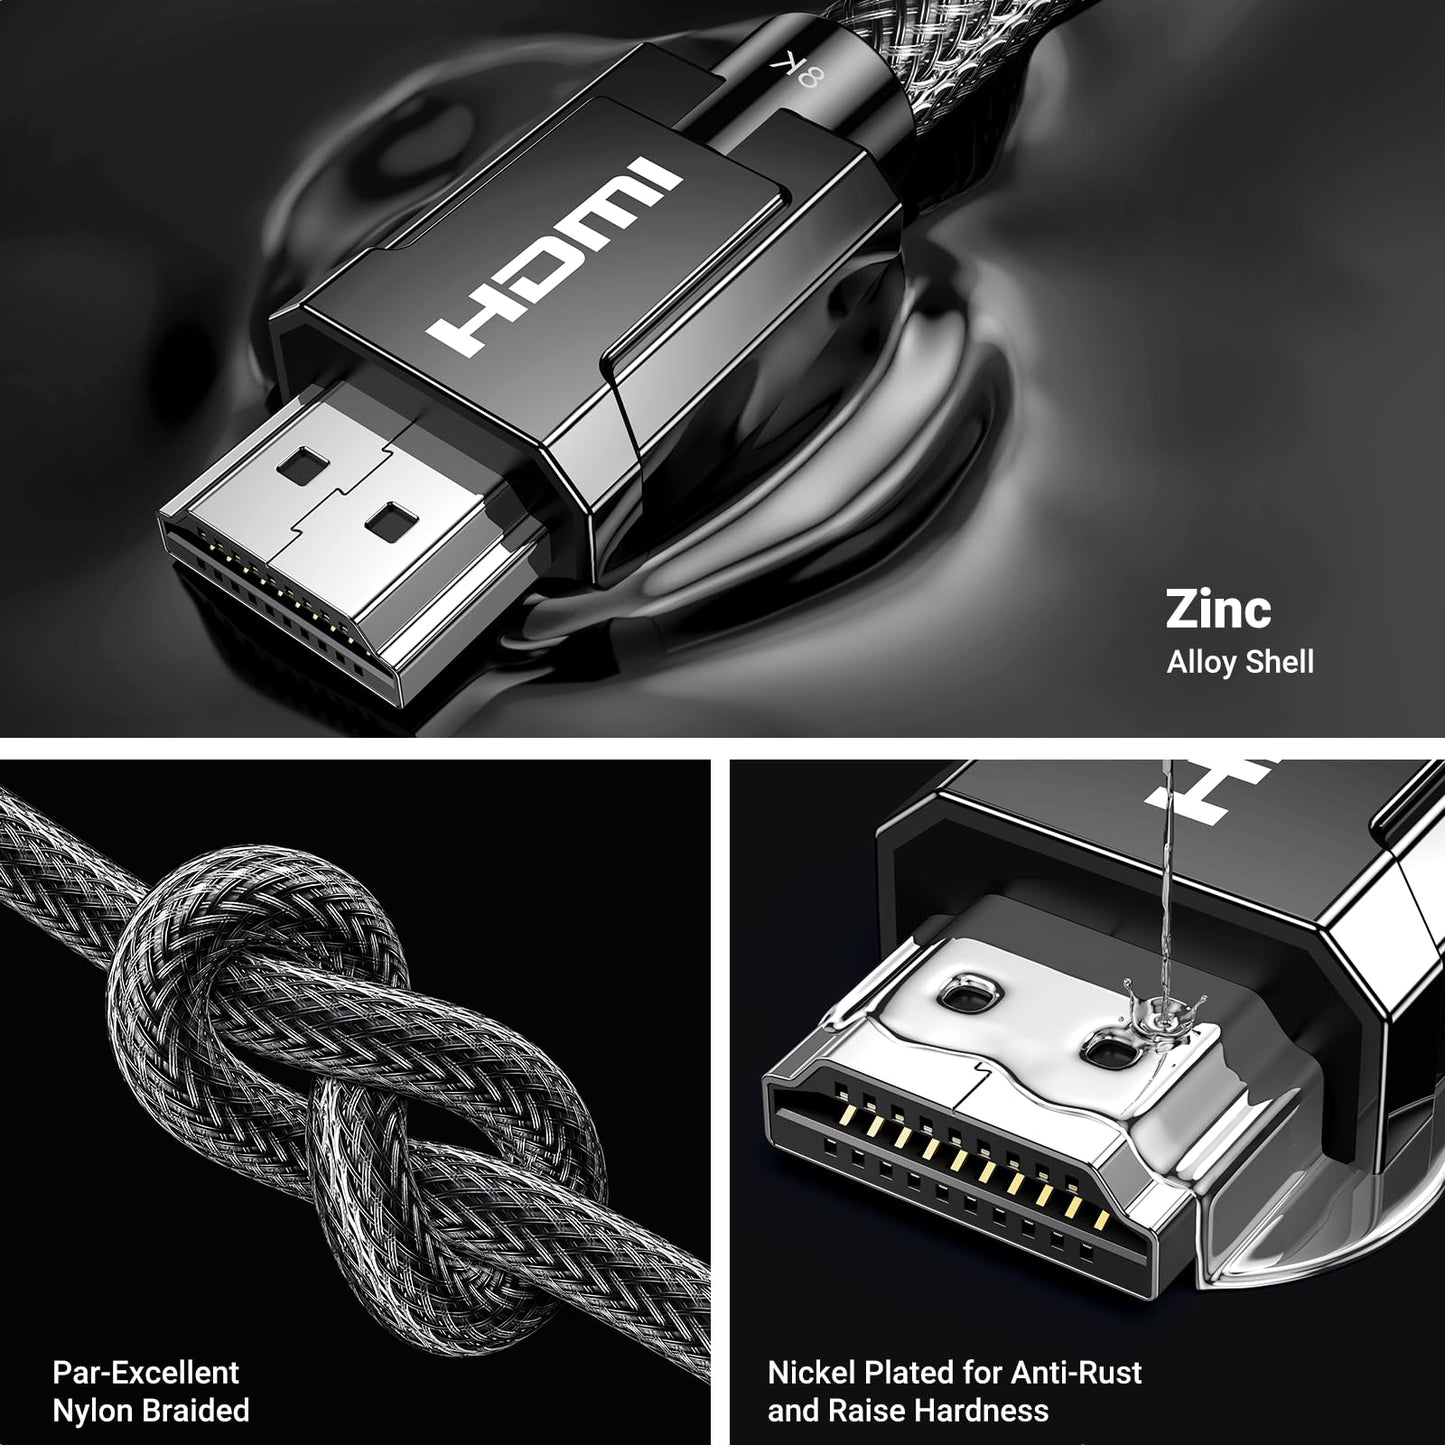 UGREEN 8K HDMI 2.1 Cable Certified 6.6FT, 10K Ultra High Speed HDMI Cord 4K 240Hz 48Gbps HDCP 2.2&2.3 eARC HDR Dolby Compatible for PS5 Xbox Series X Nintendo Switch Roku TV Laptop Monitor